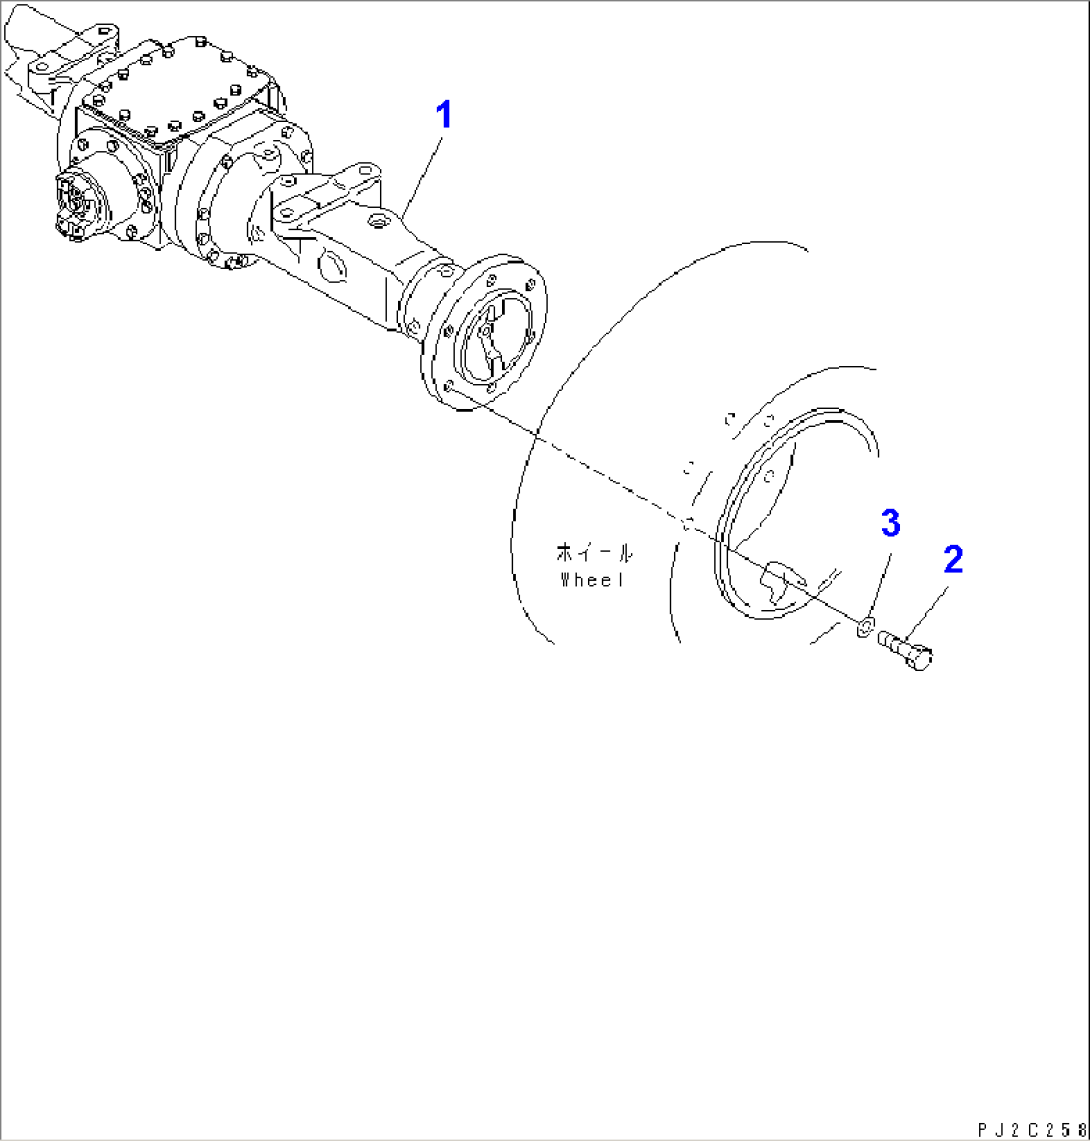 REAR AXLE AND WHEEL MOUNTING PARTS